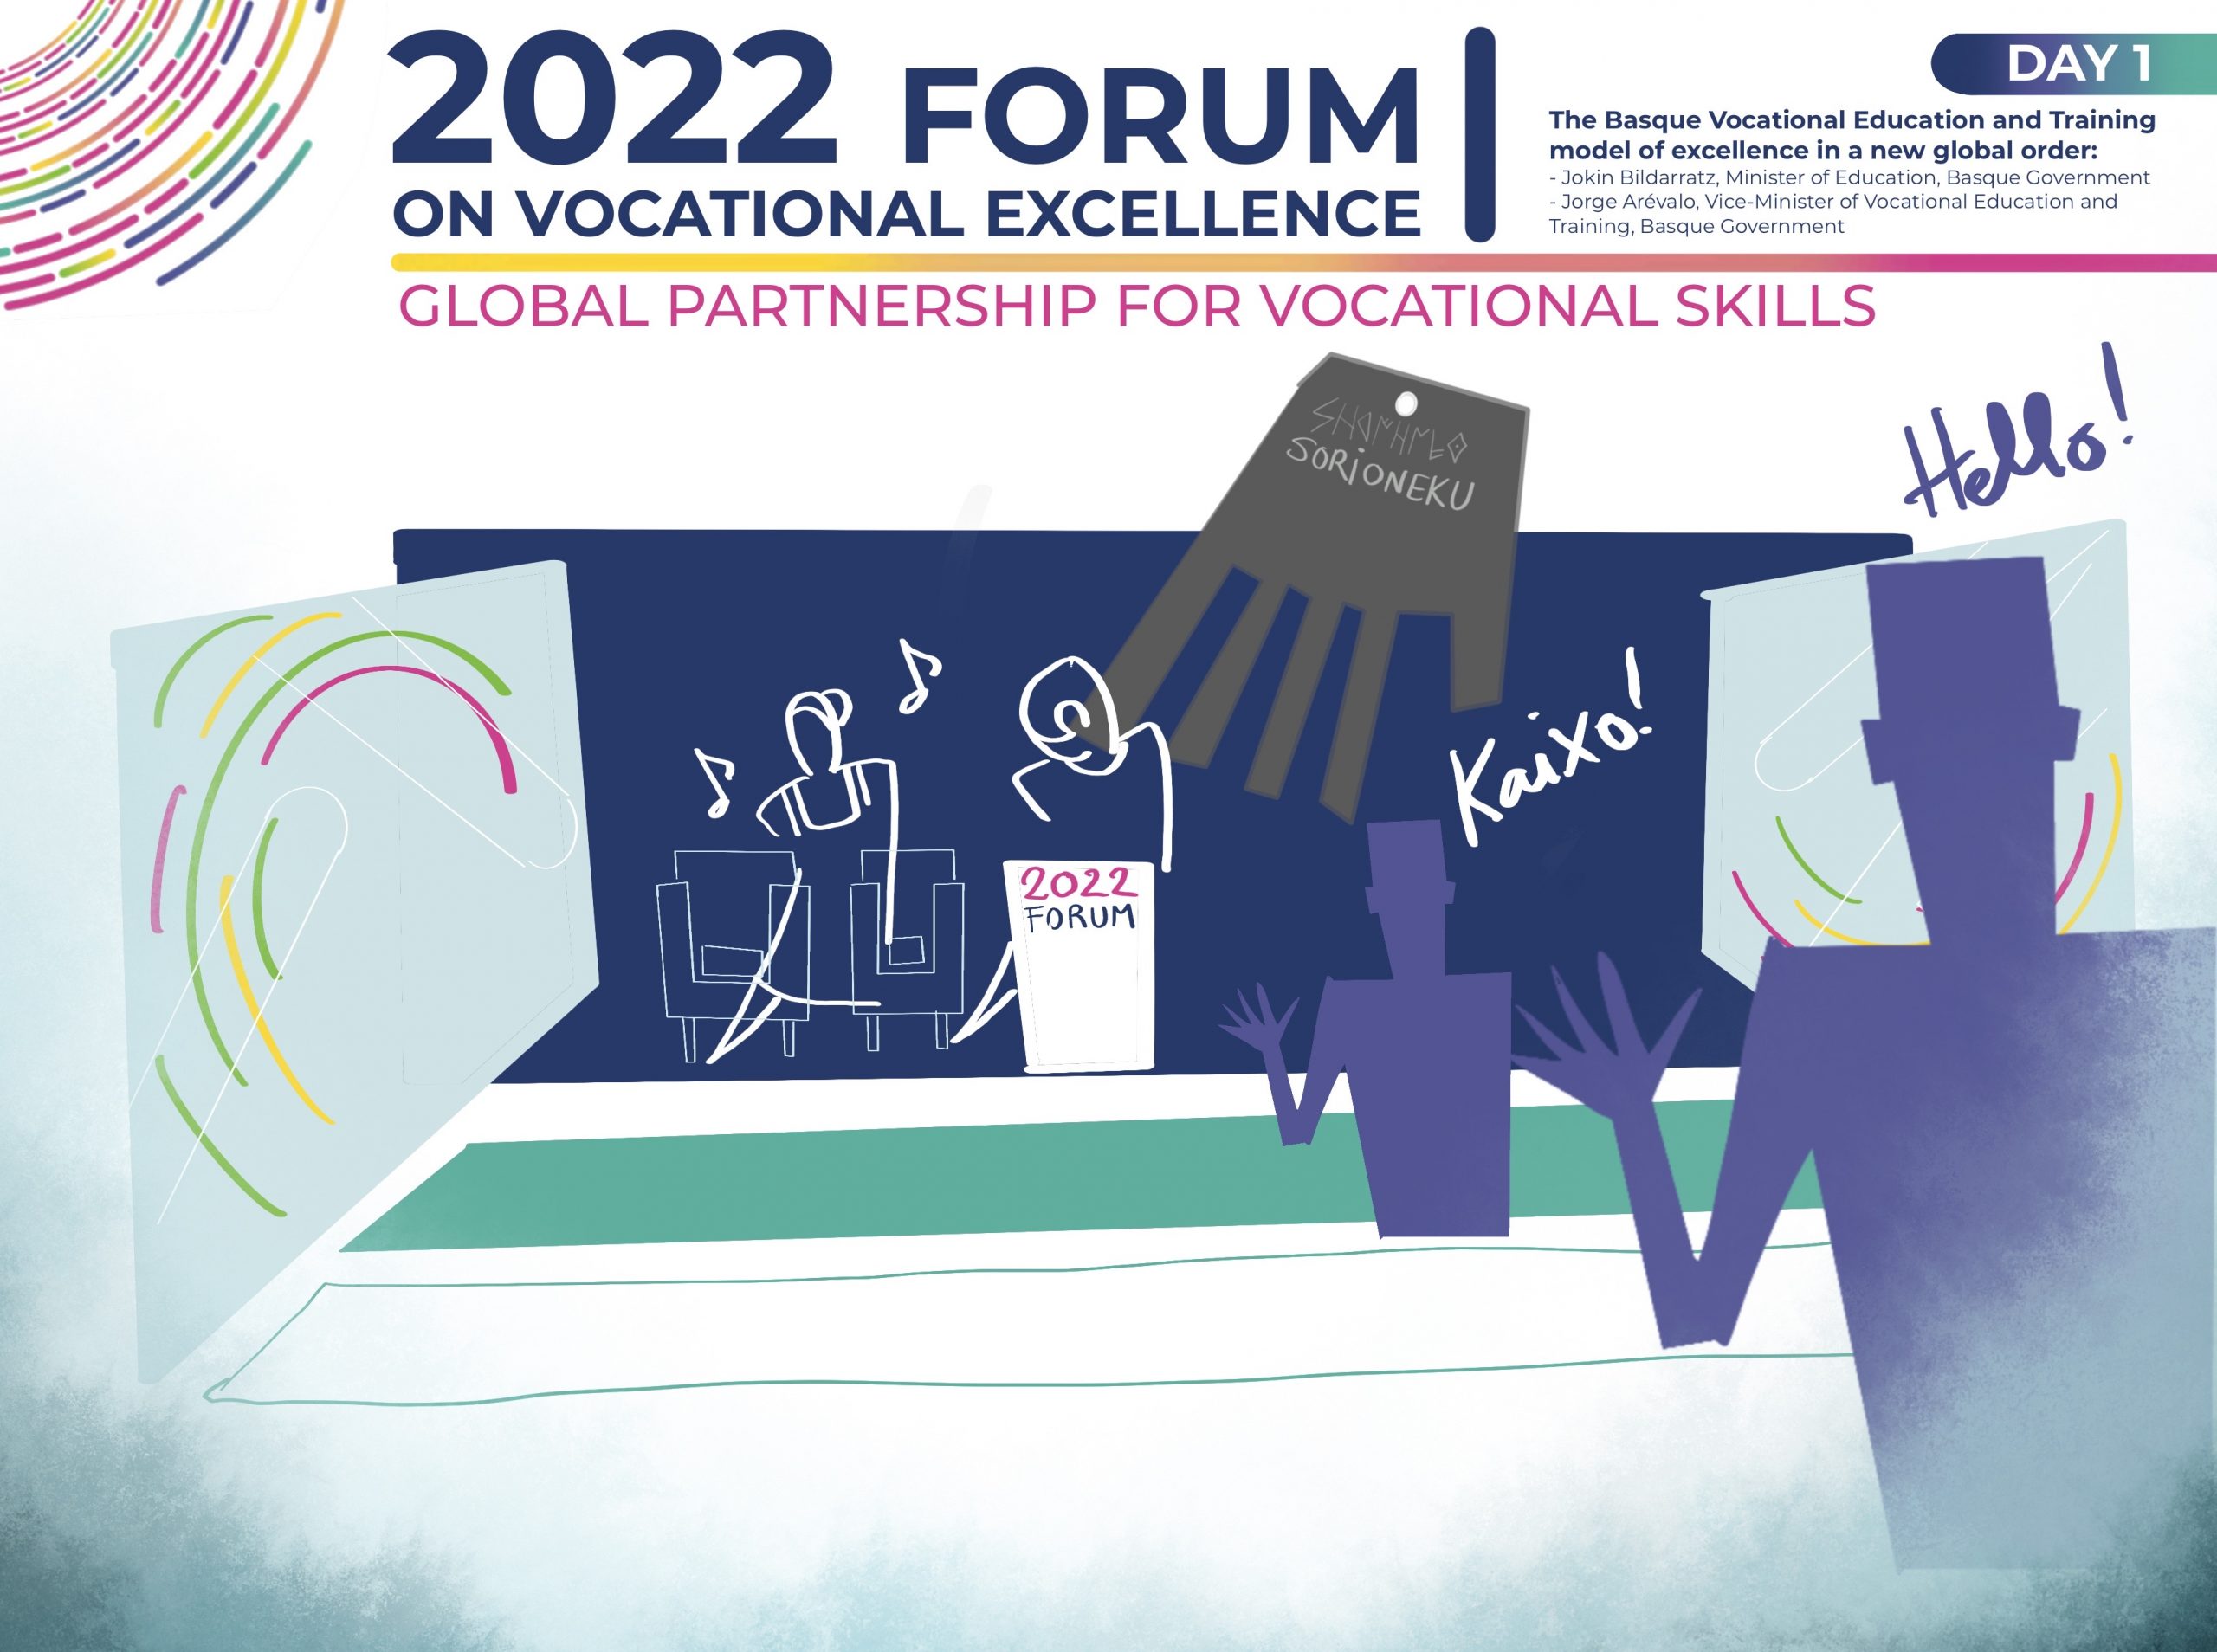 2022 Forum on Vocational Excellence